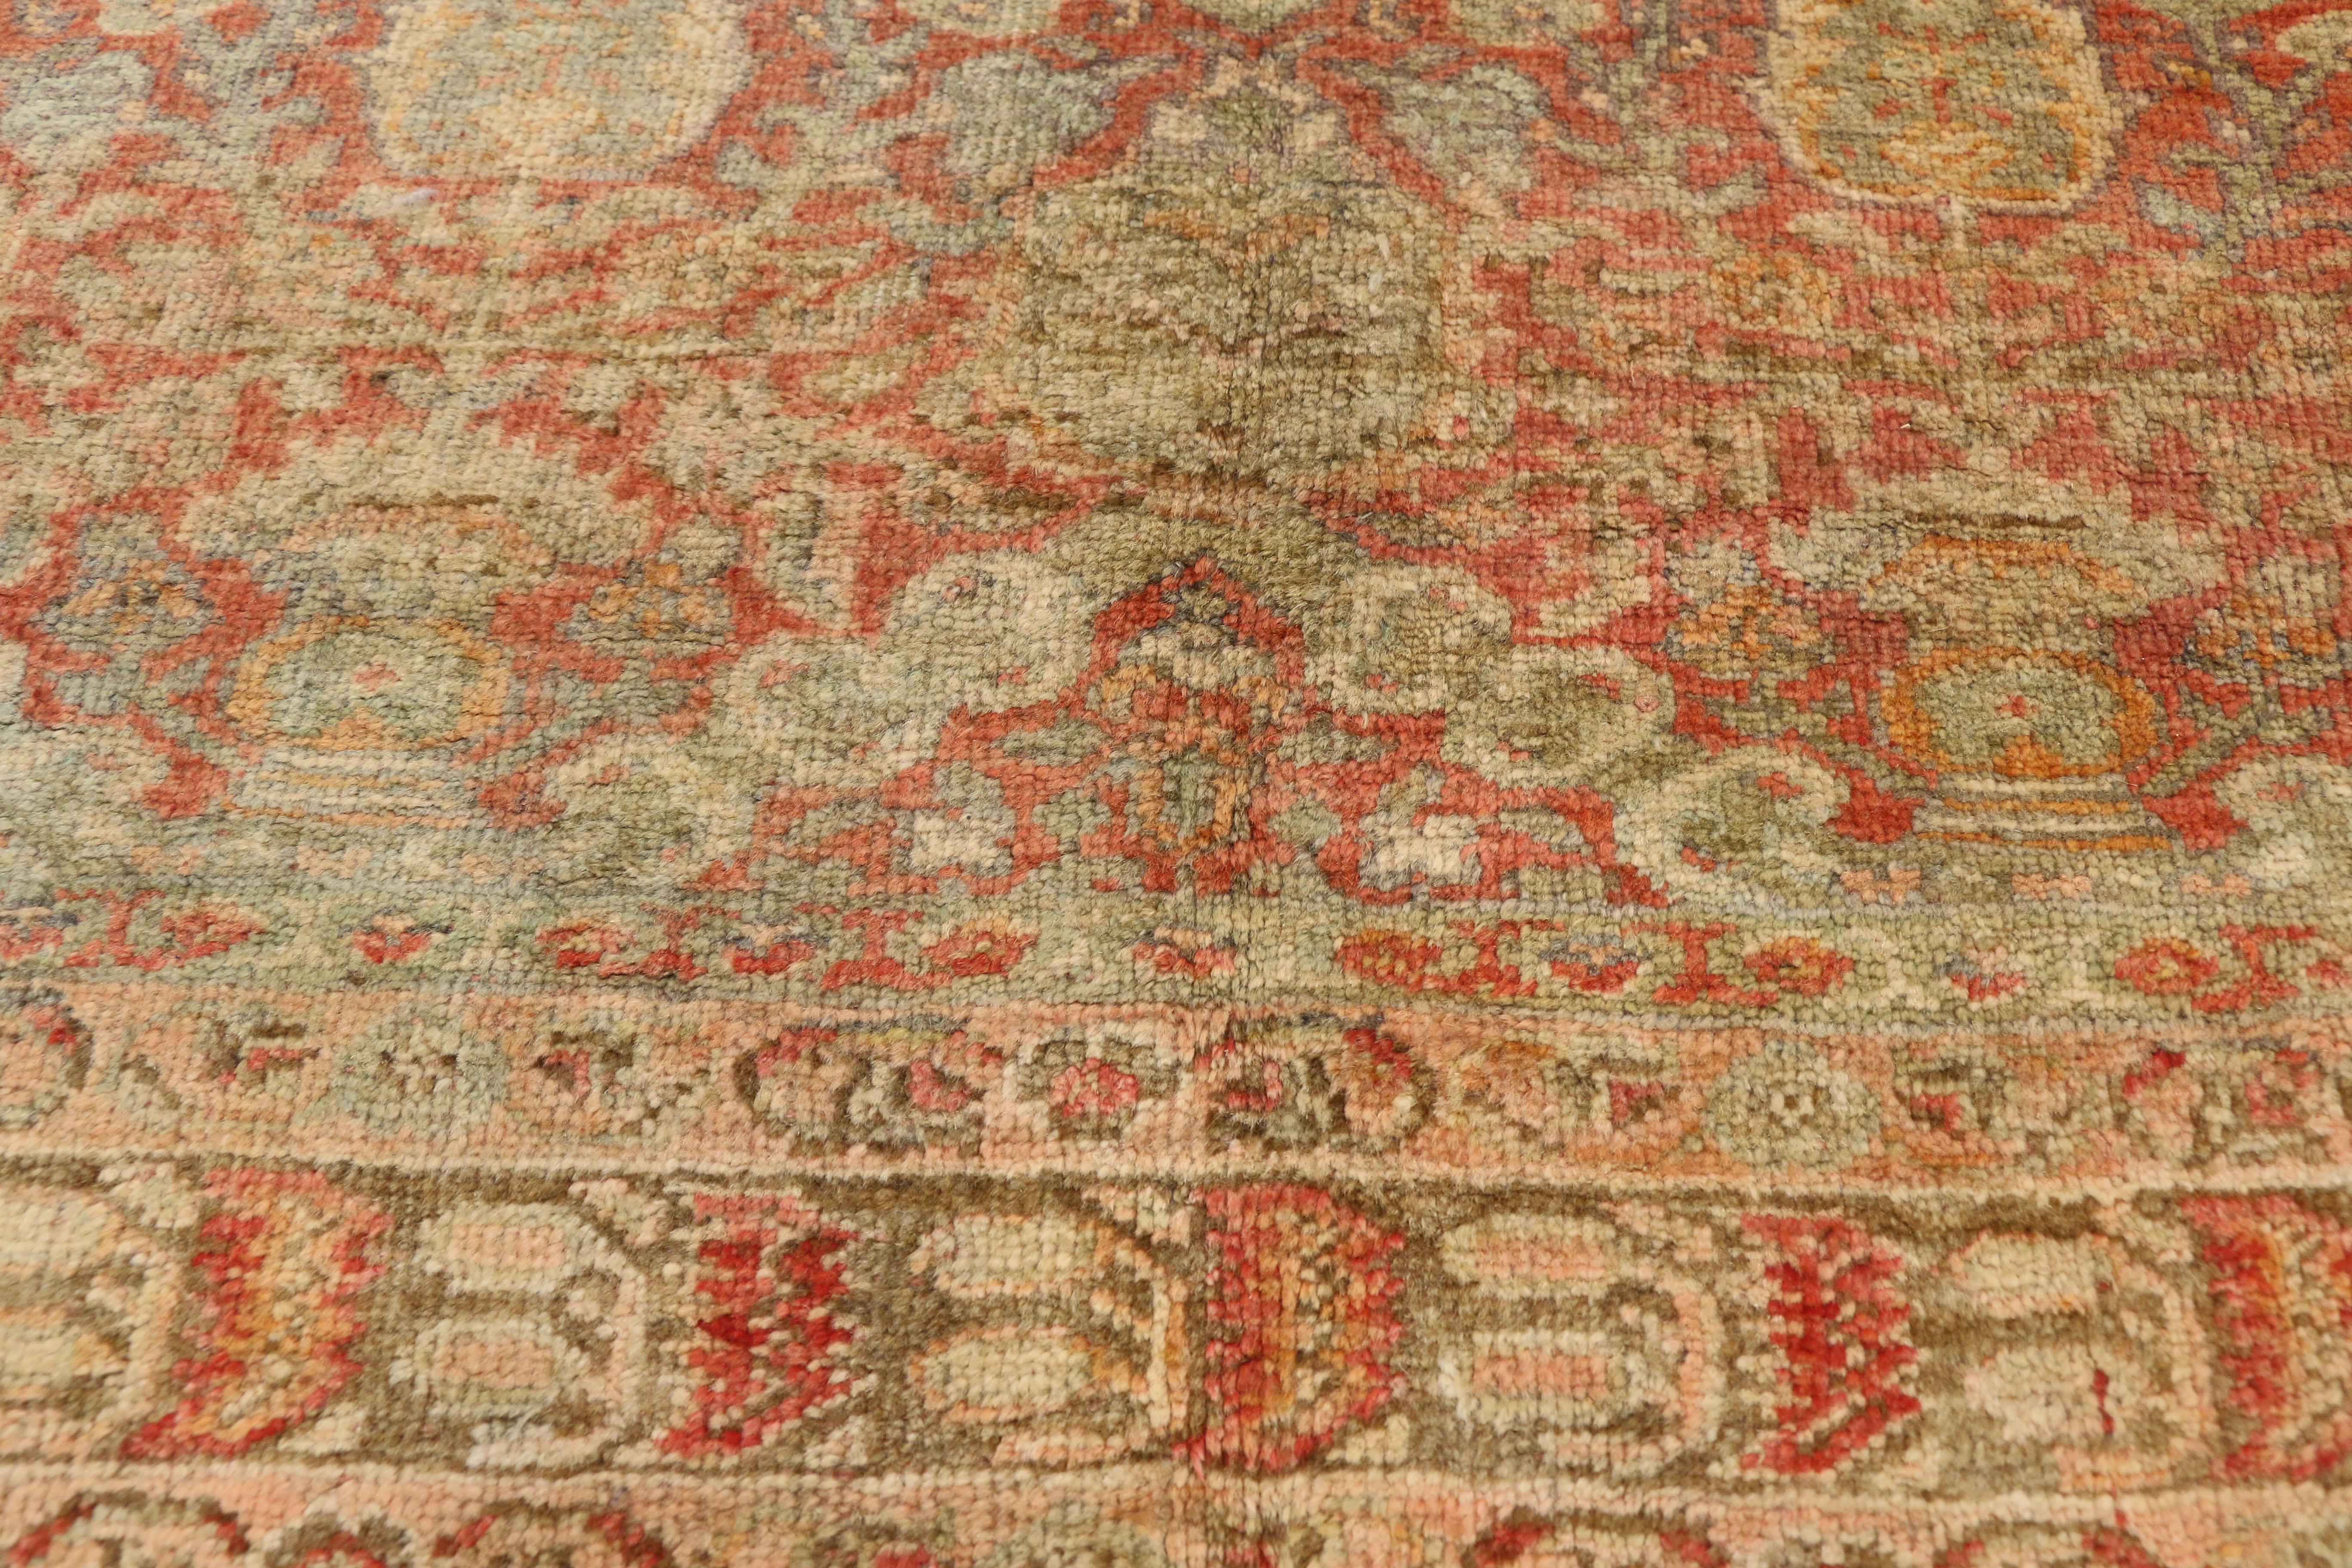 Pair of Antique Turkish Oushak Gallery Rugs, Matching Wide Hallway Runners In Good Condition For Sale In Dallas, TX